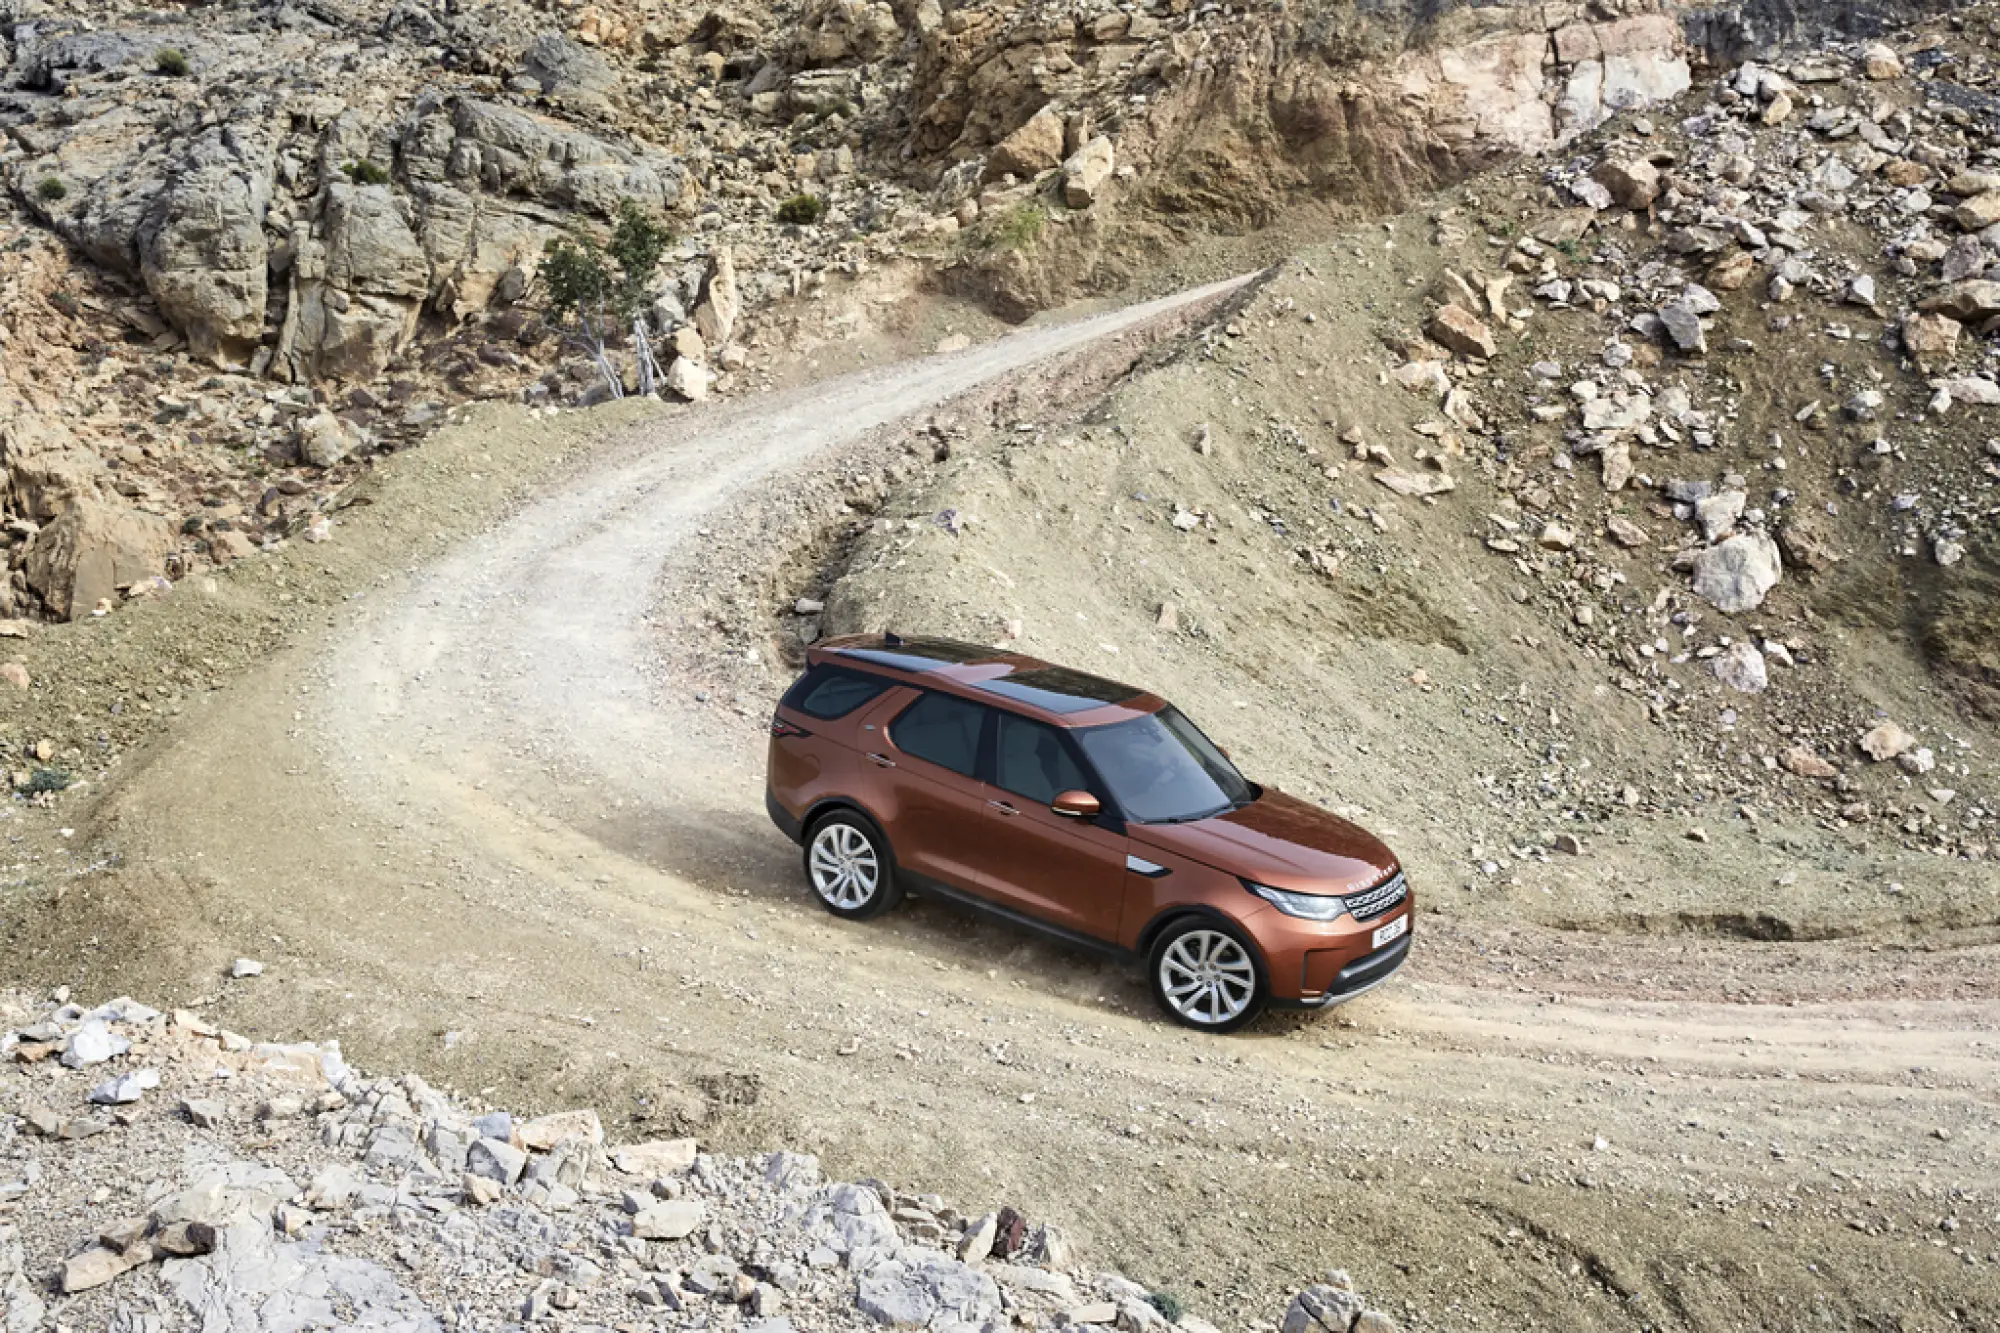 Foto stampa nuova Land Rover Discovery MY 2017 28 settembre 2016 - 30